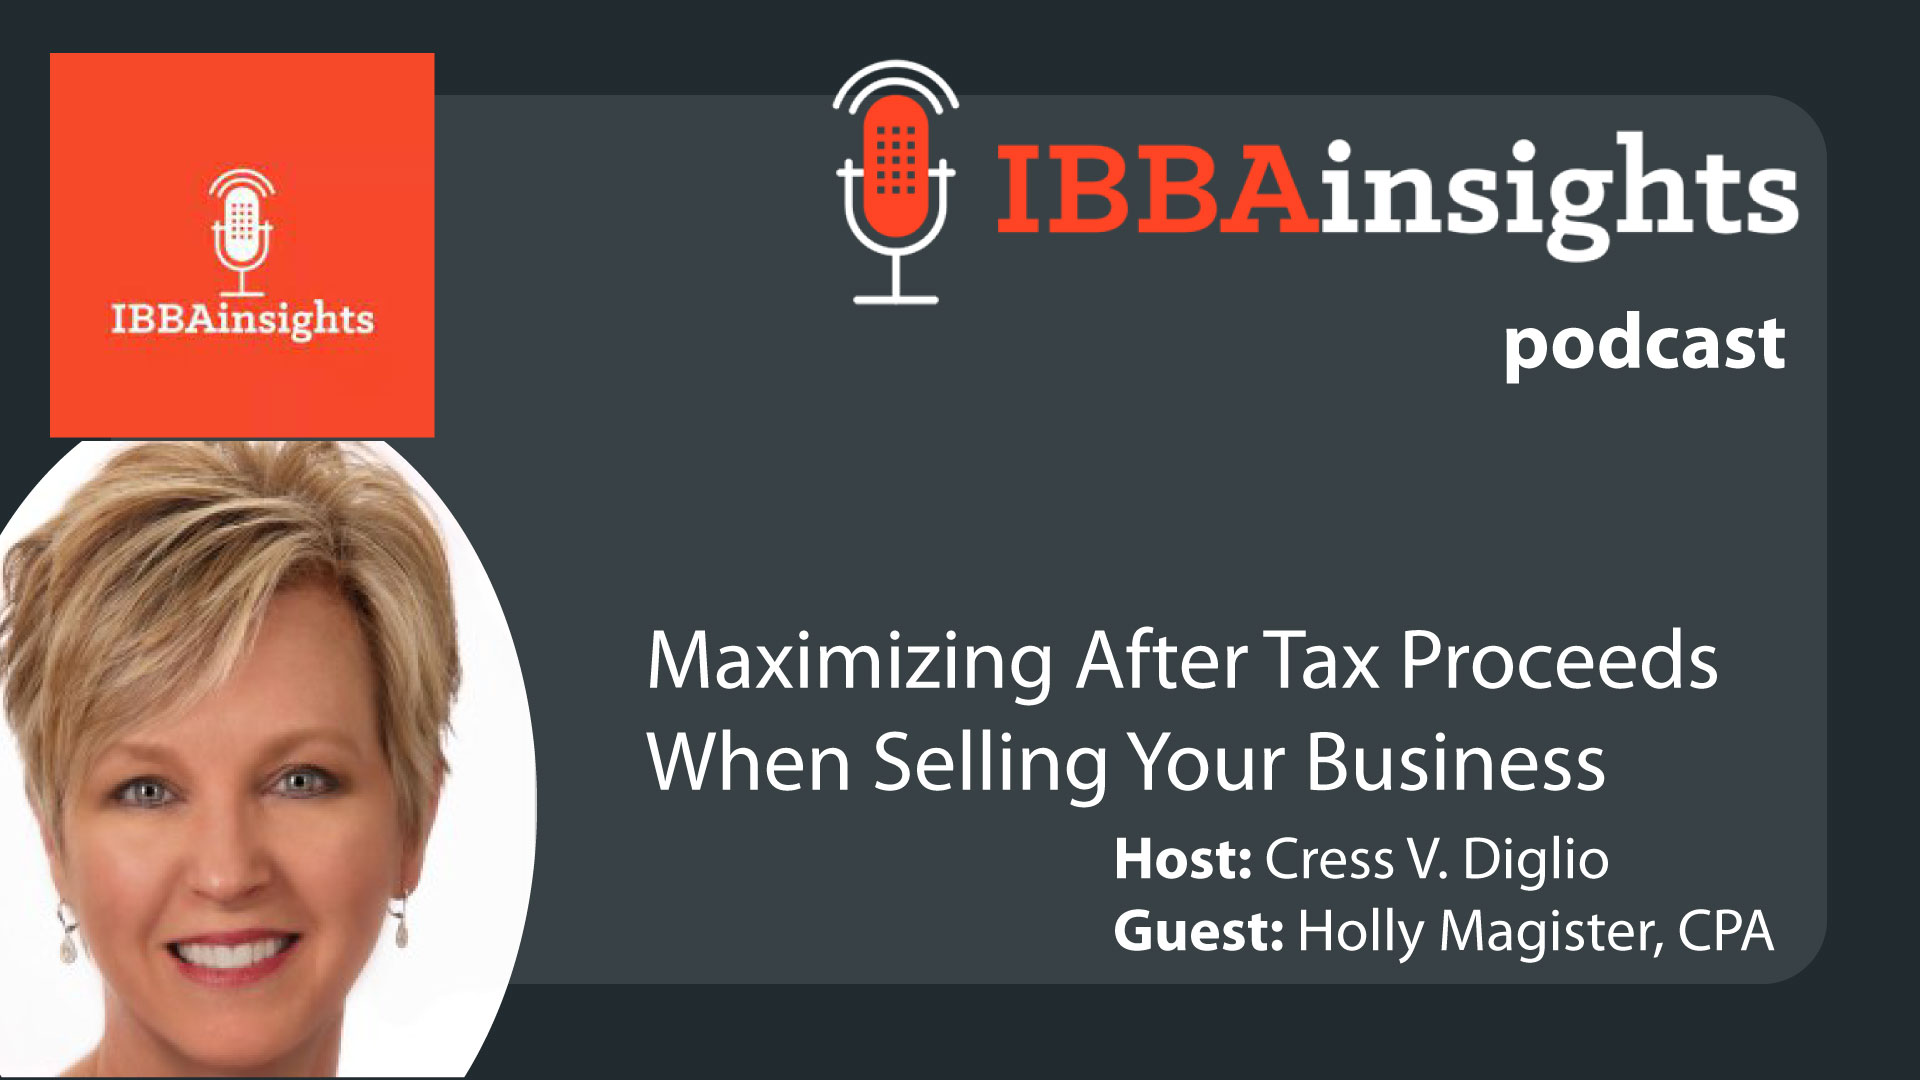 Sale of Business Tax Planning Podcast